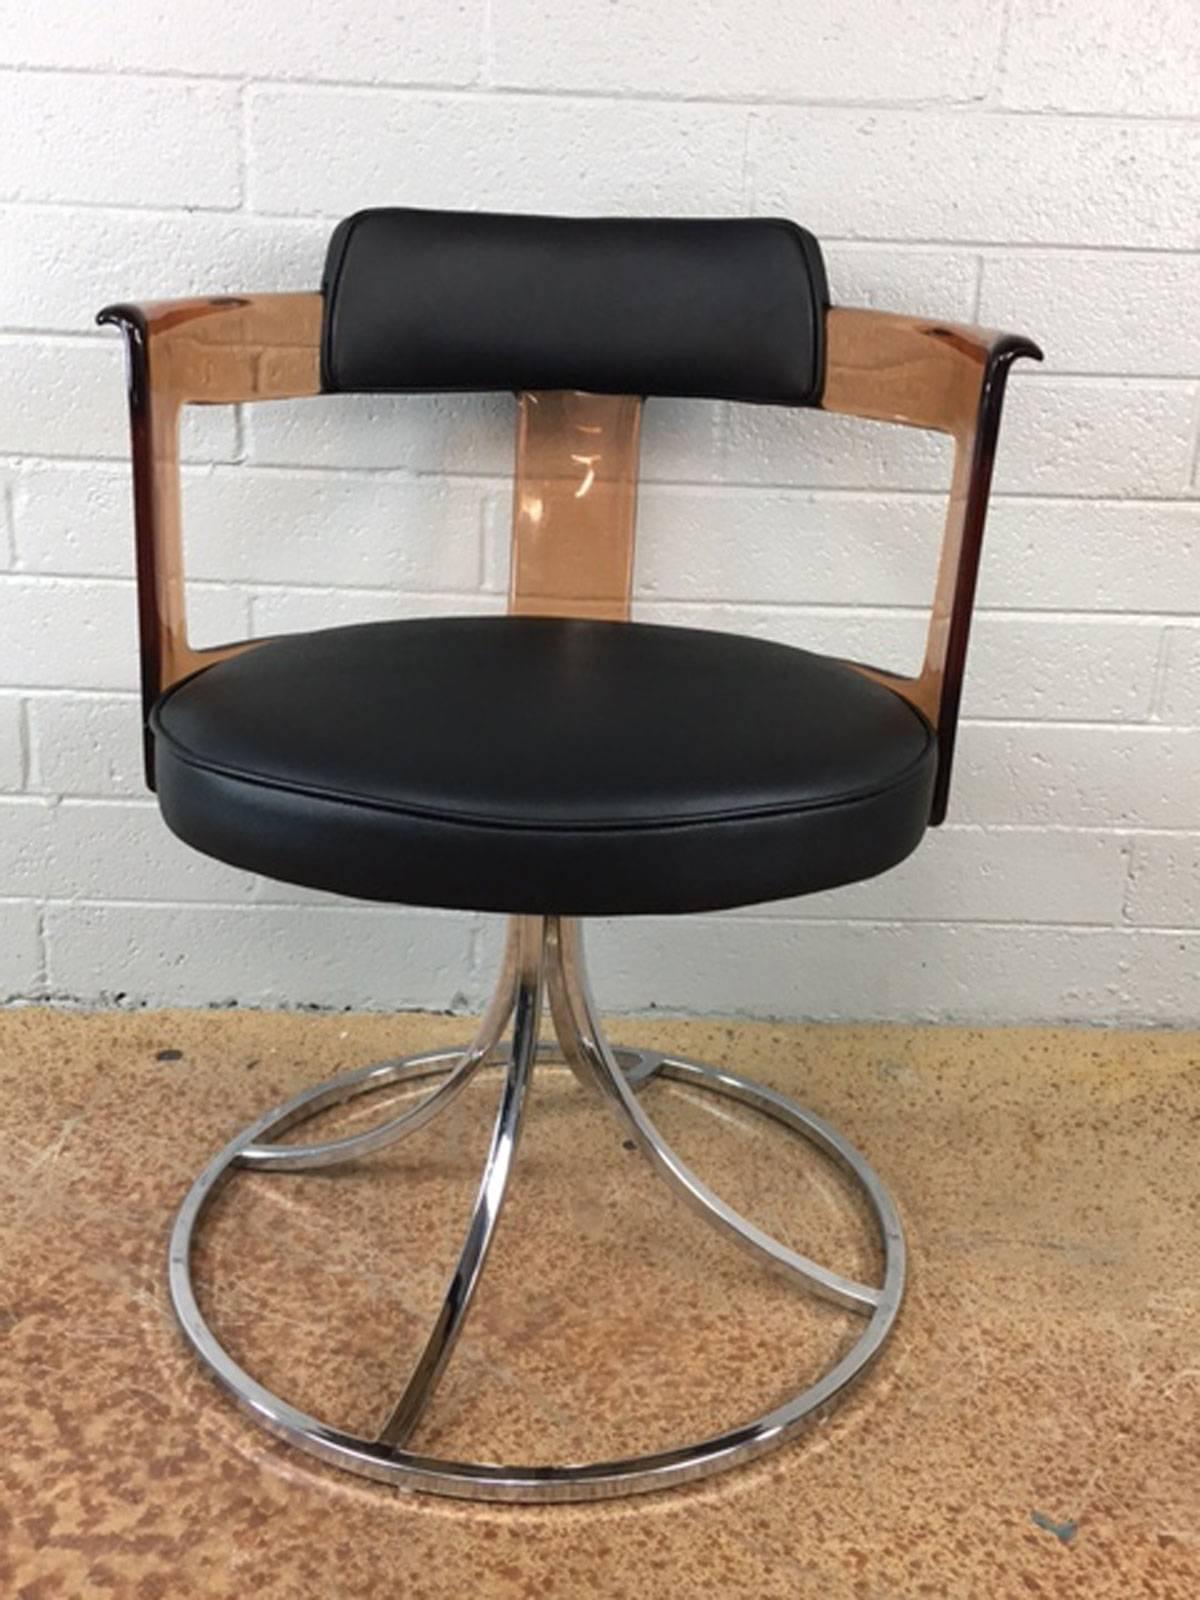 Pair of circa 1970s acrylic, leather and chrome swivel side chairs. New leather upholstery.